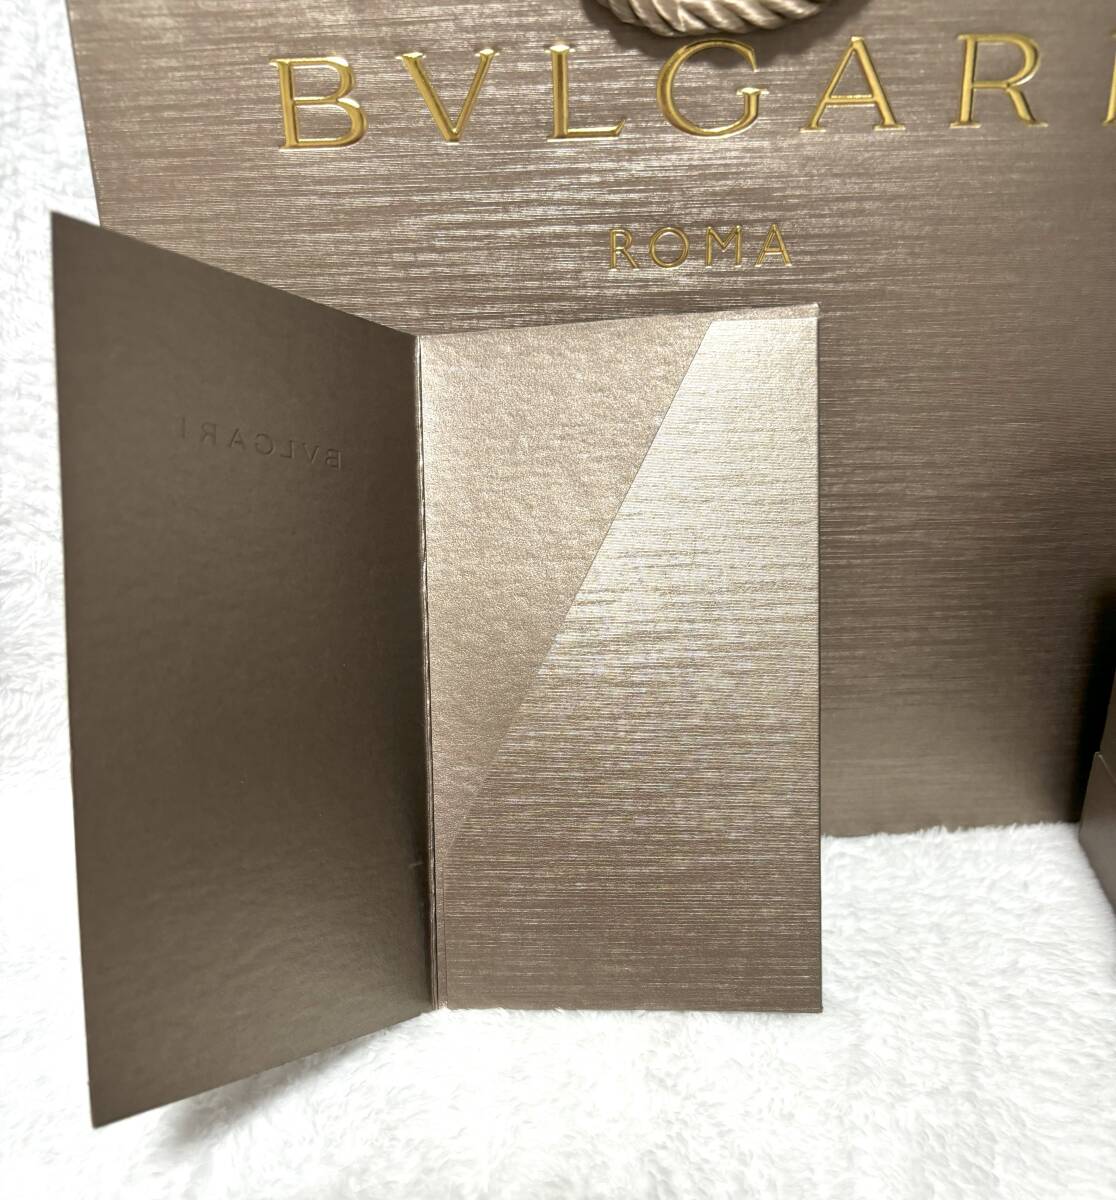 ★★BVLGARI◆正規店腕時計購入時の箱、袋、リボン、伝票入れセット◆美品★★_画像5